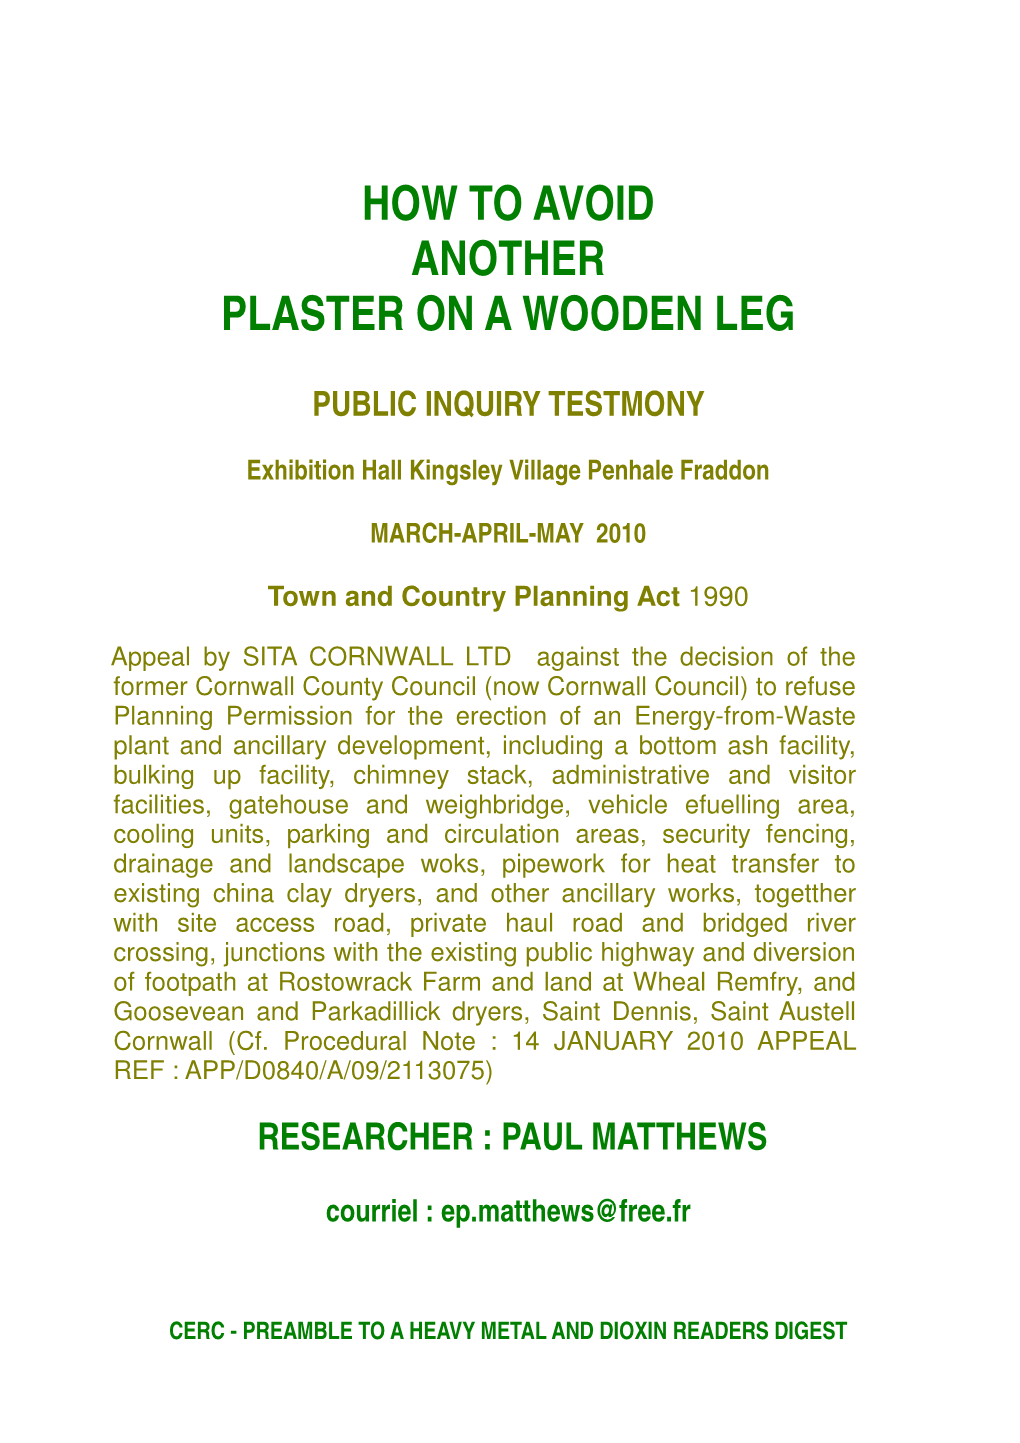 How to Avoid Another Plaster on a Wooden Leg